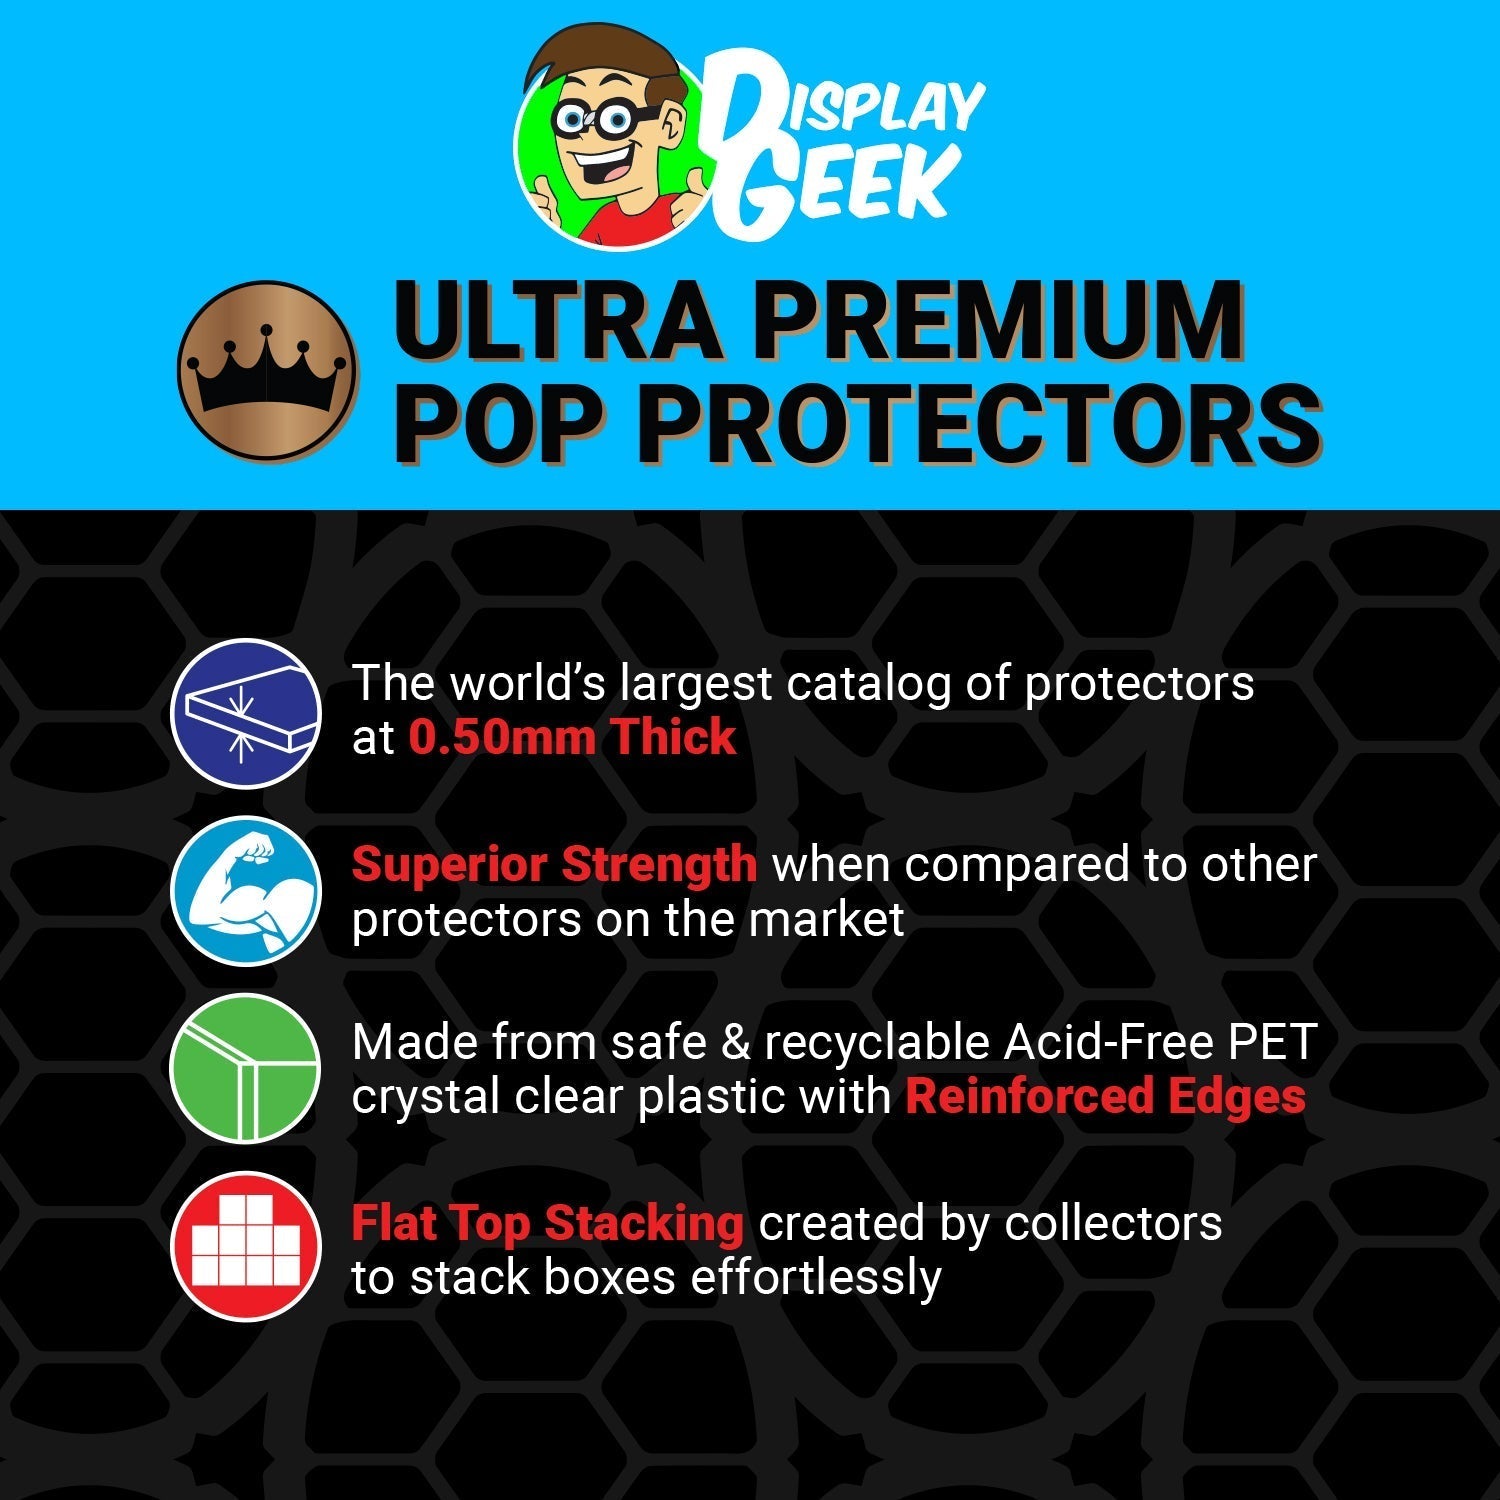 Pop Protector for All For One Funko Pop Pez - PPG Pop Protector Guide Search Created by Display Geek